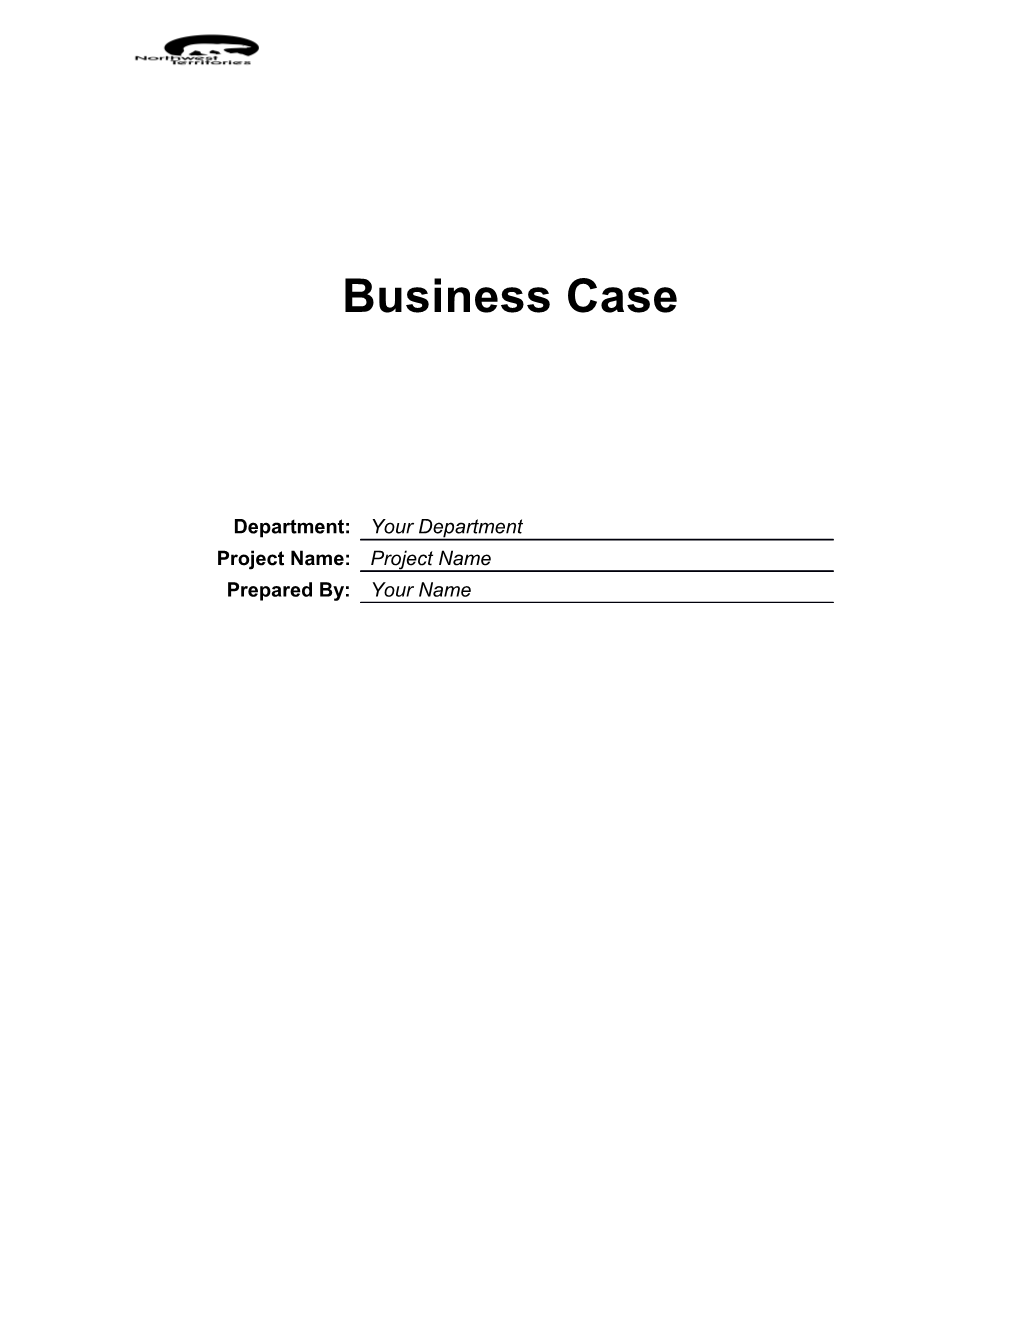 Business Case Project Name